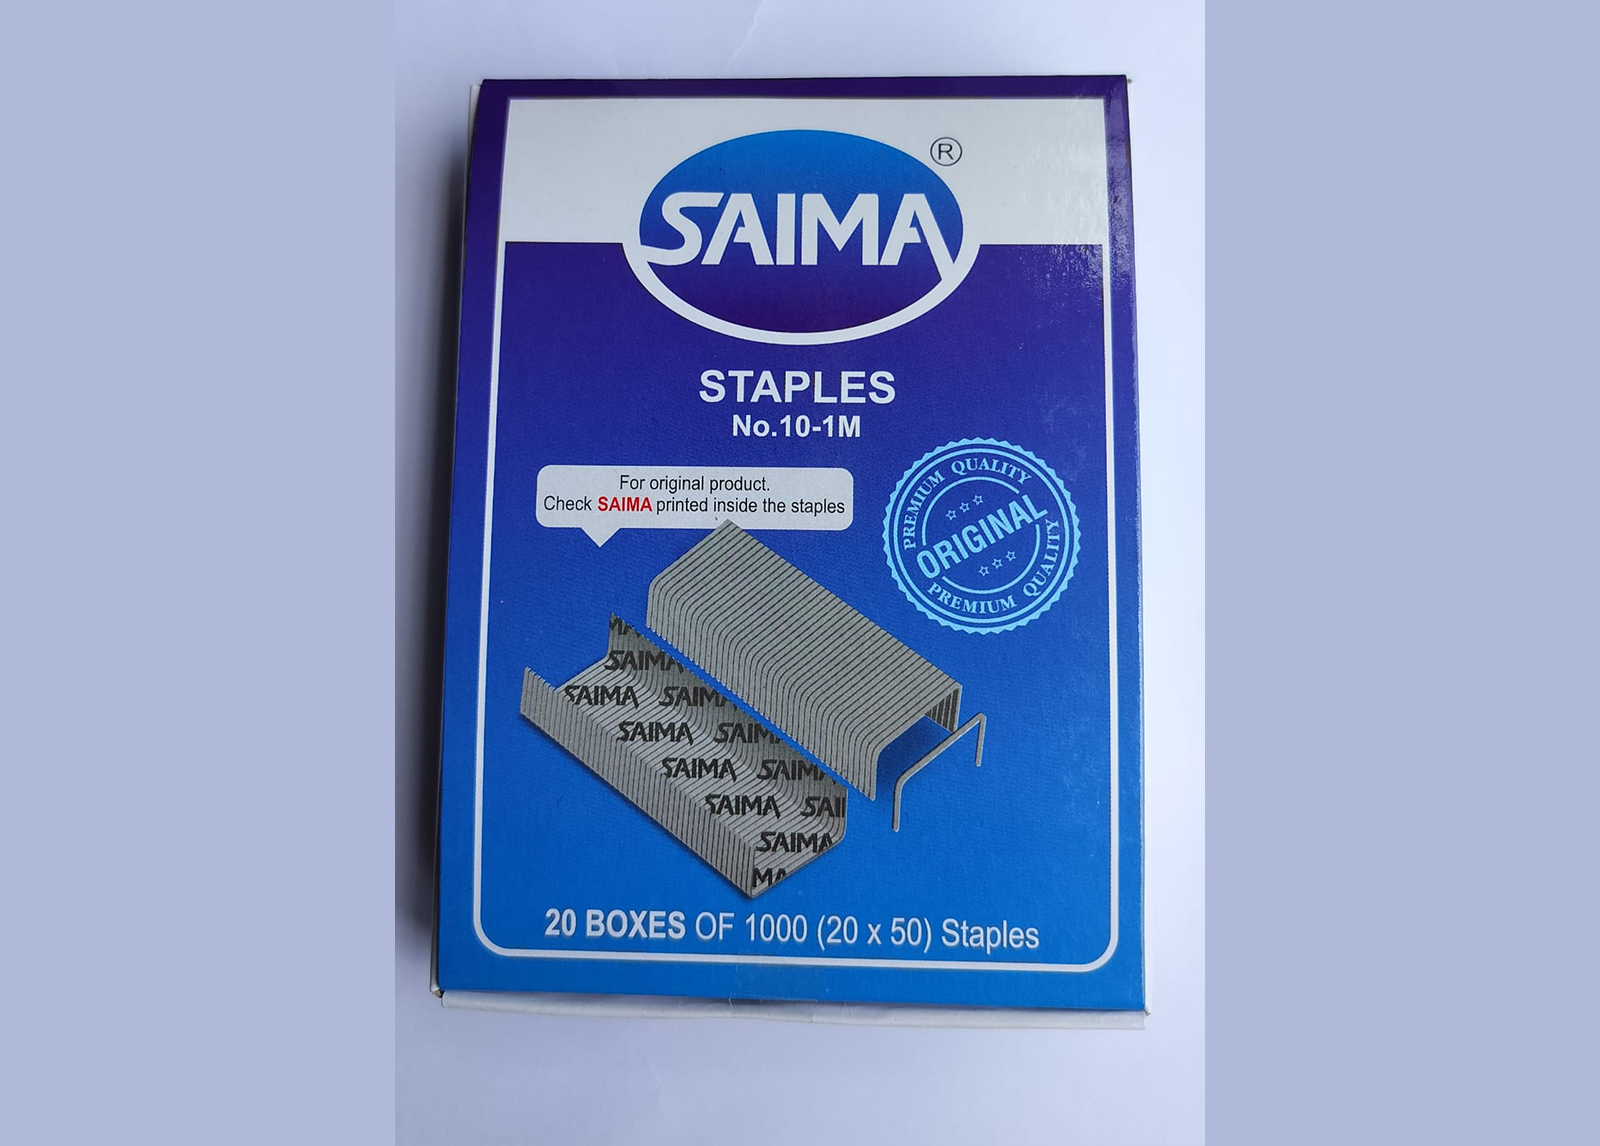 Wholesale Dealers in India and Stapler Pins wholesalers